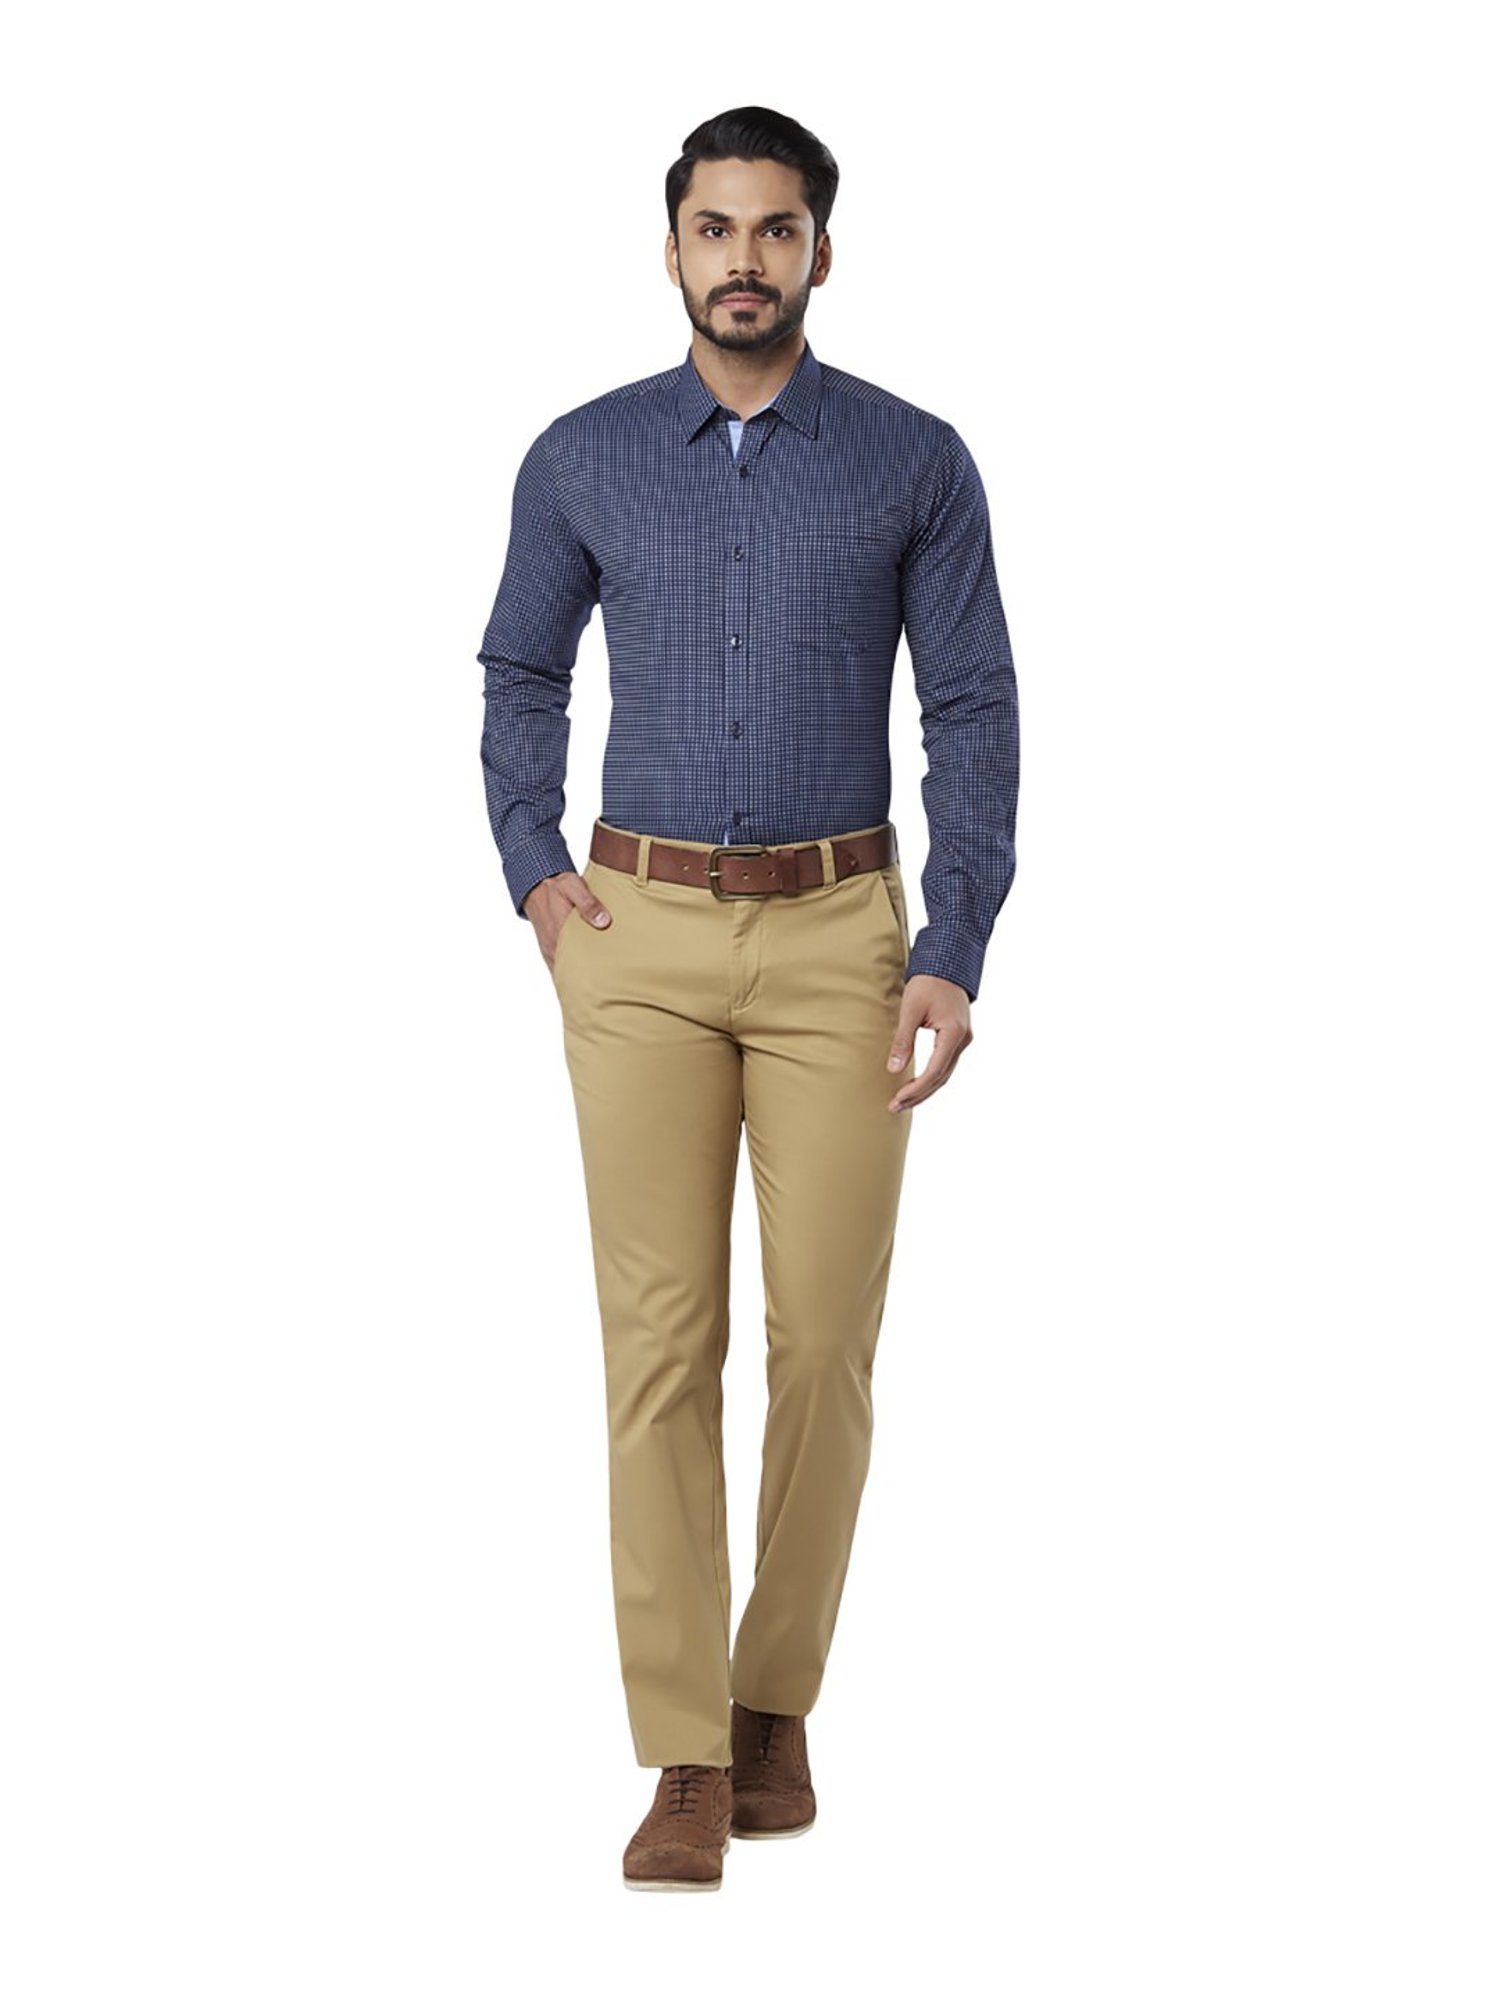 What Color Shirt Goes With Khaki Pants Foolproof Guide For Men